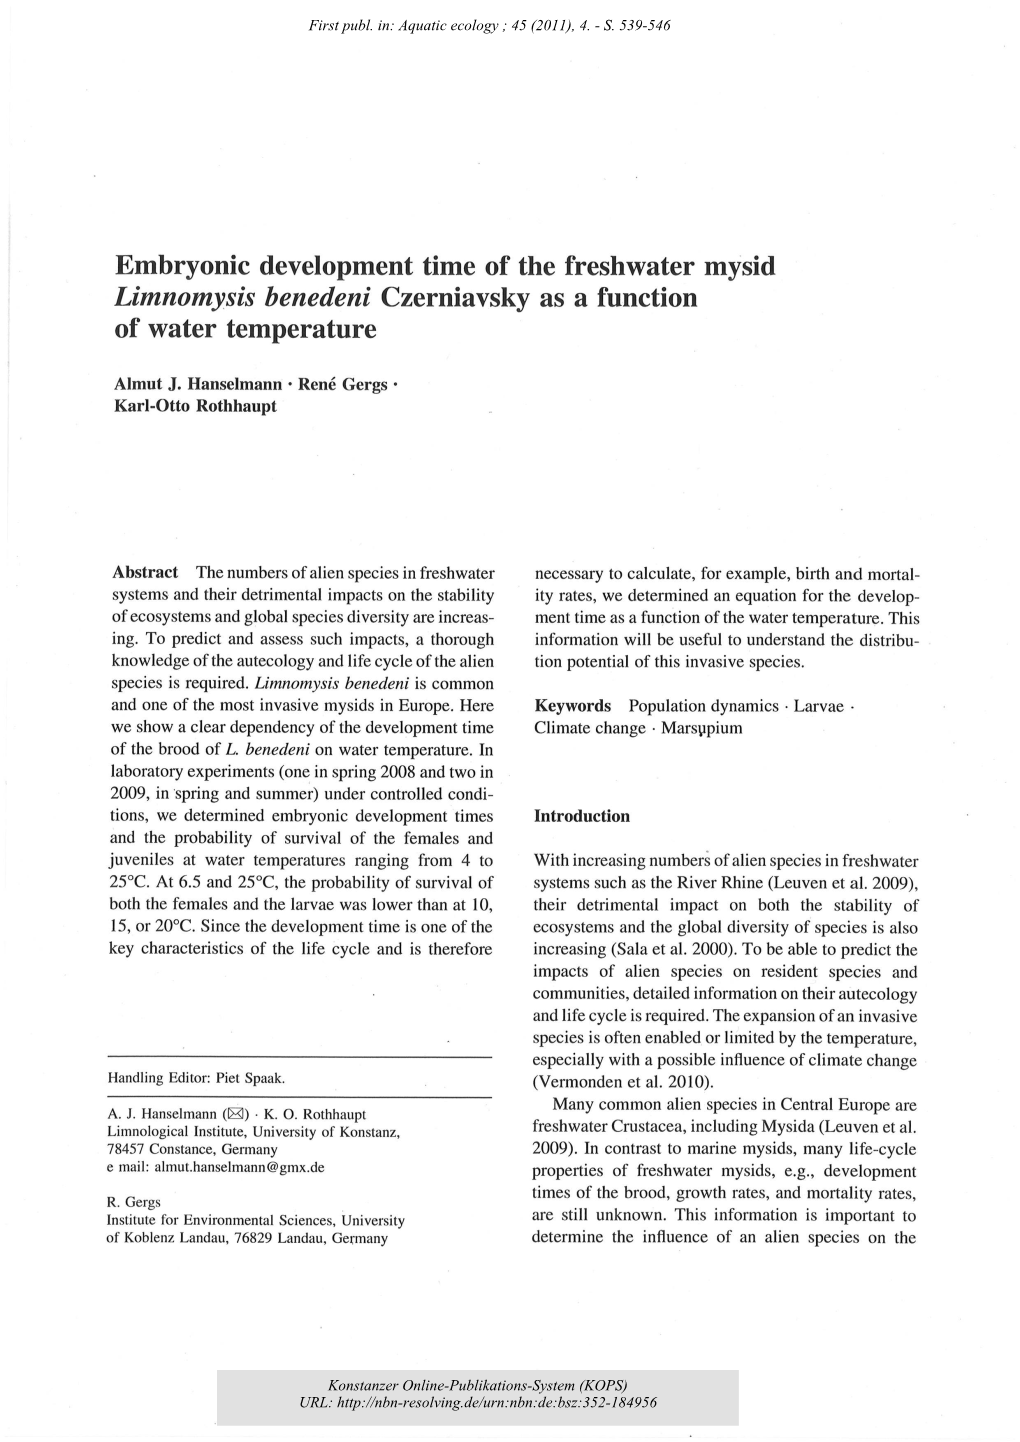 Embryonic Development Time of the Freshwater Mysid Limnomysis Benedeni Czerniavsky As a Function of Water Temperature